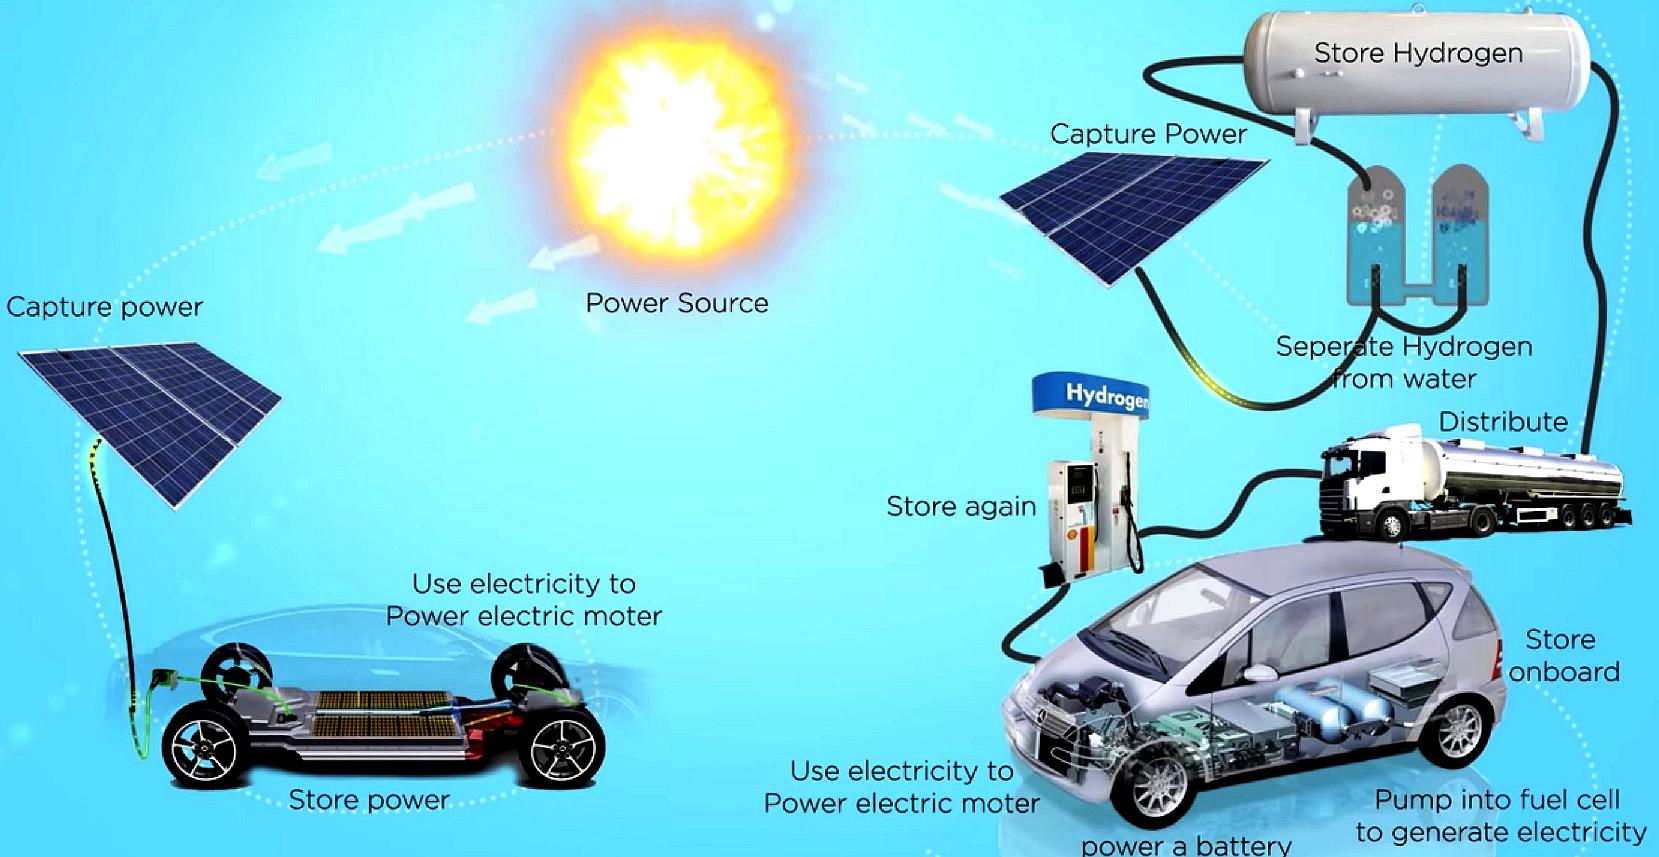 Inforgraphic energy conversion and supply chain for solar energy against battery and hydrogen technology